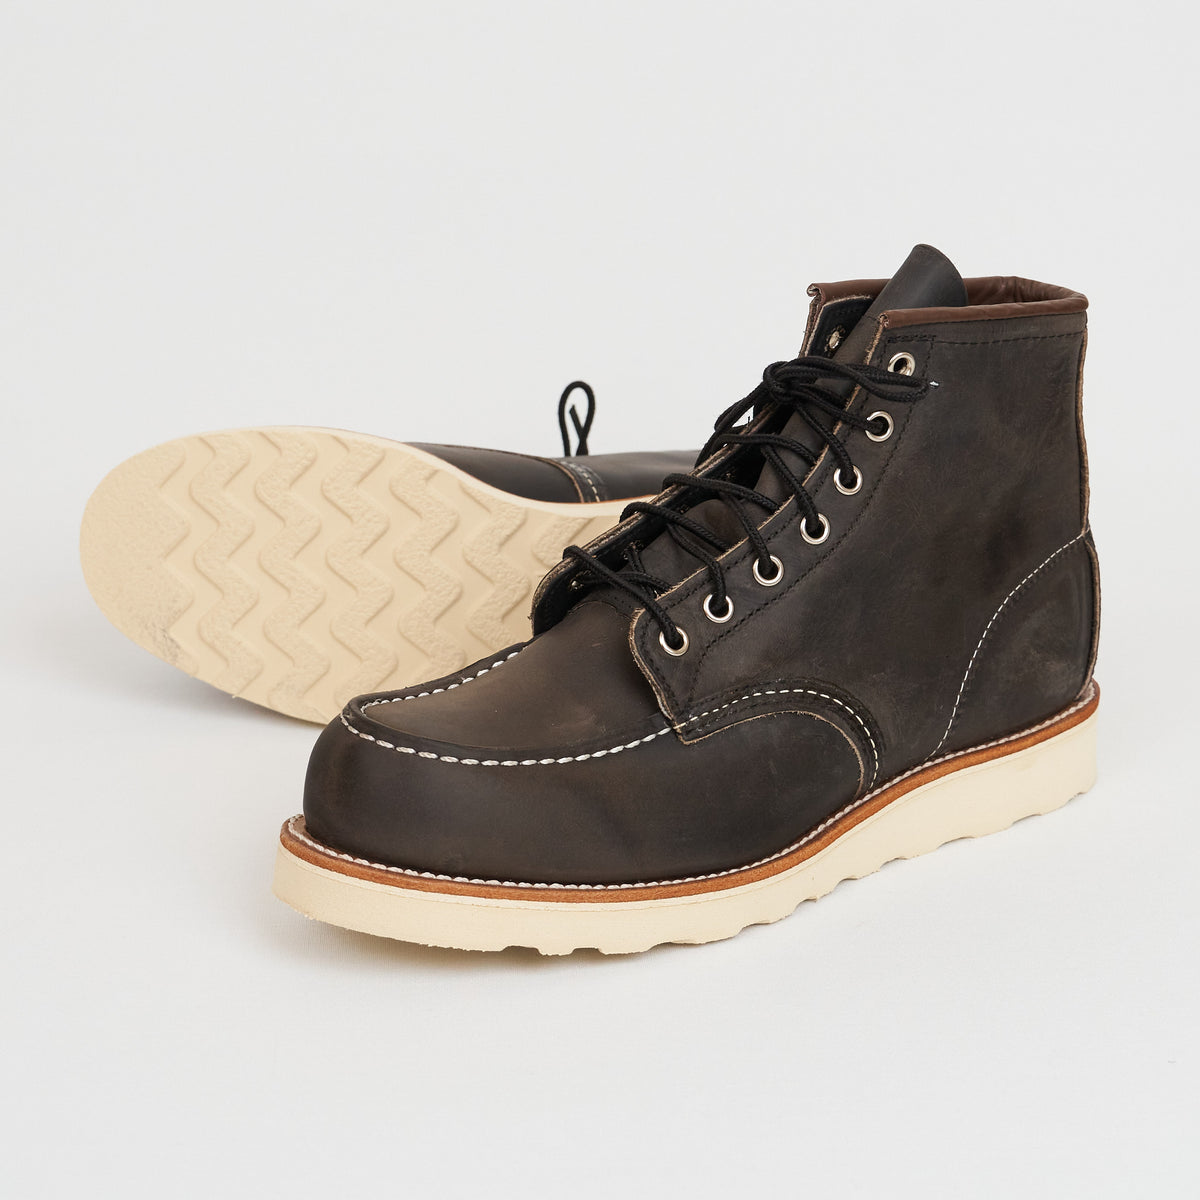 Red Wing Heritage Shoes Classic Moc-Toe 8890, 875, 8131, 8138, 8849